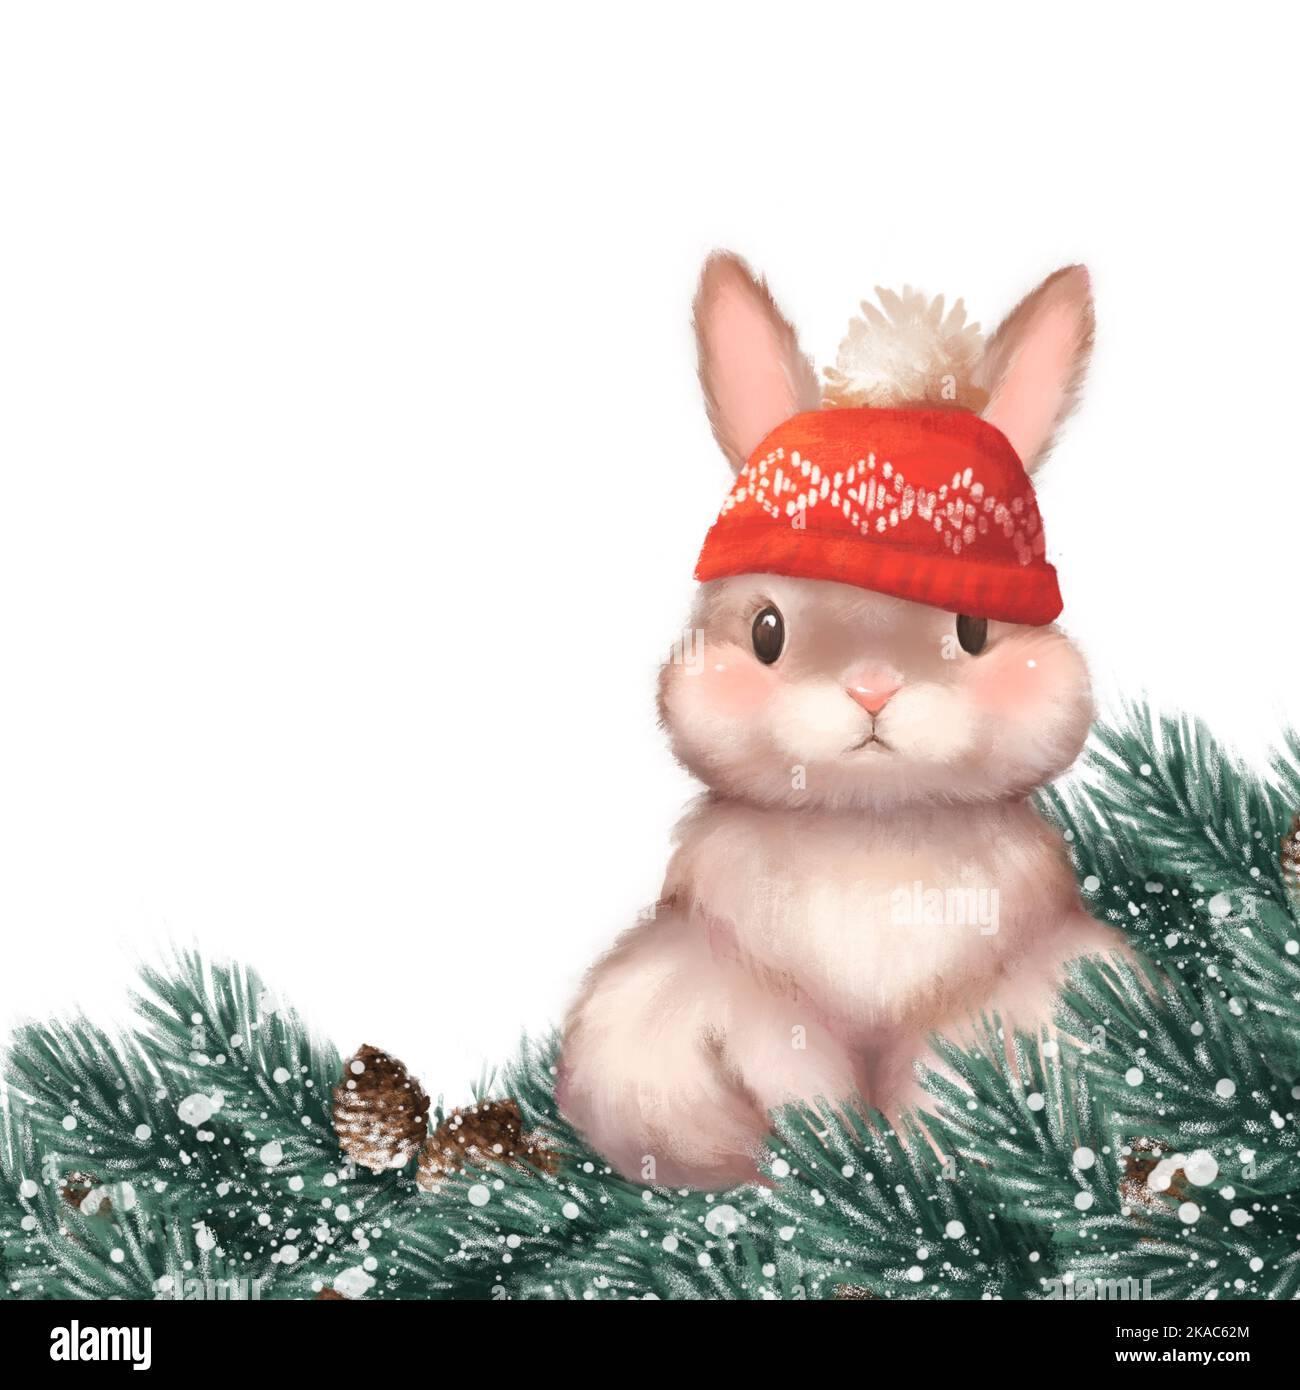 Cute bunny in red hat. Christmas illustration on white background Stock Photo